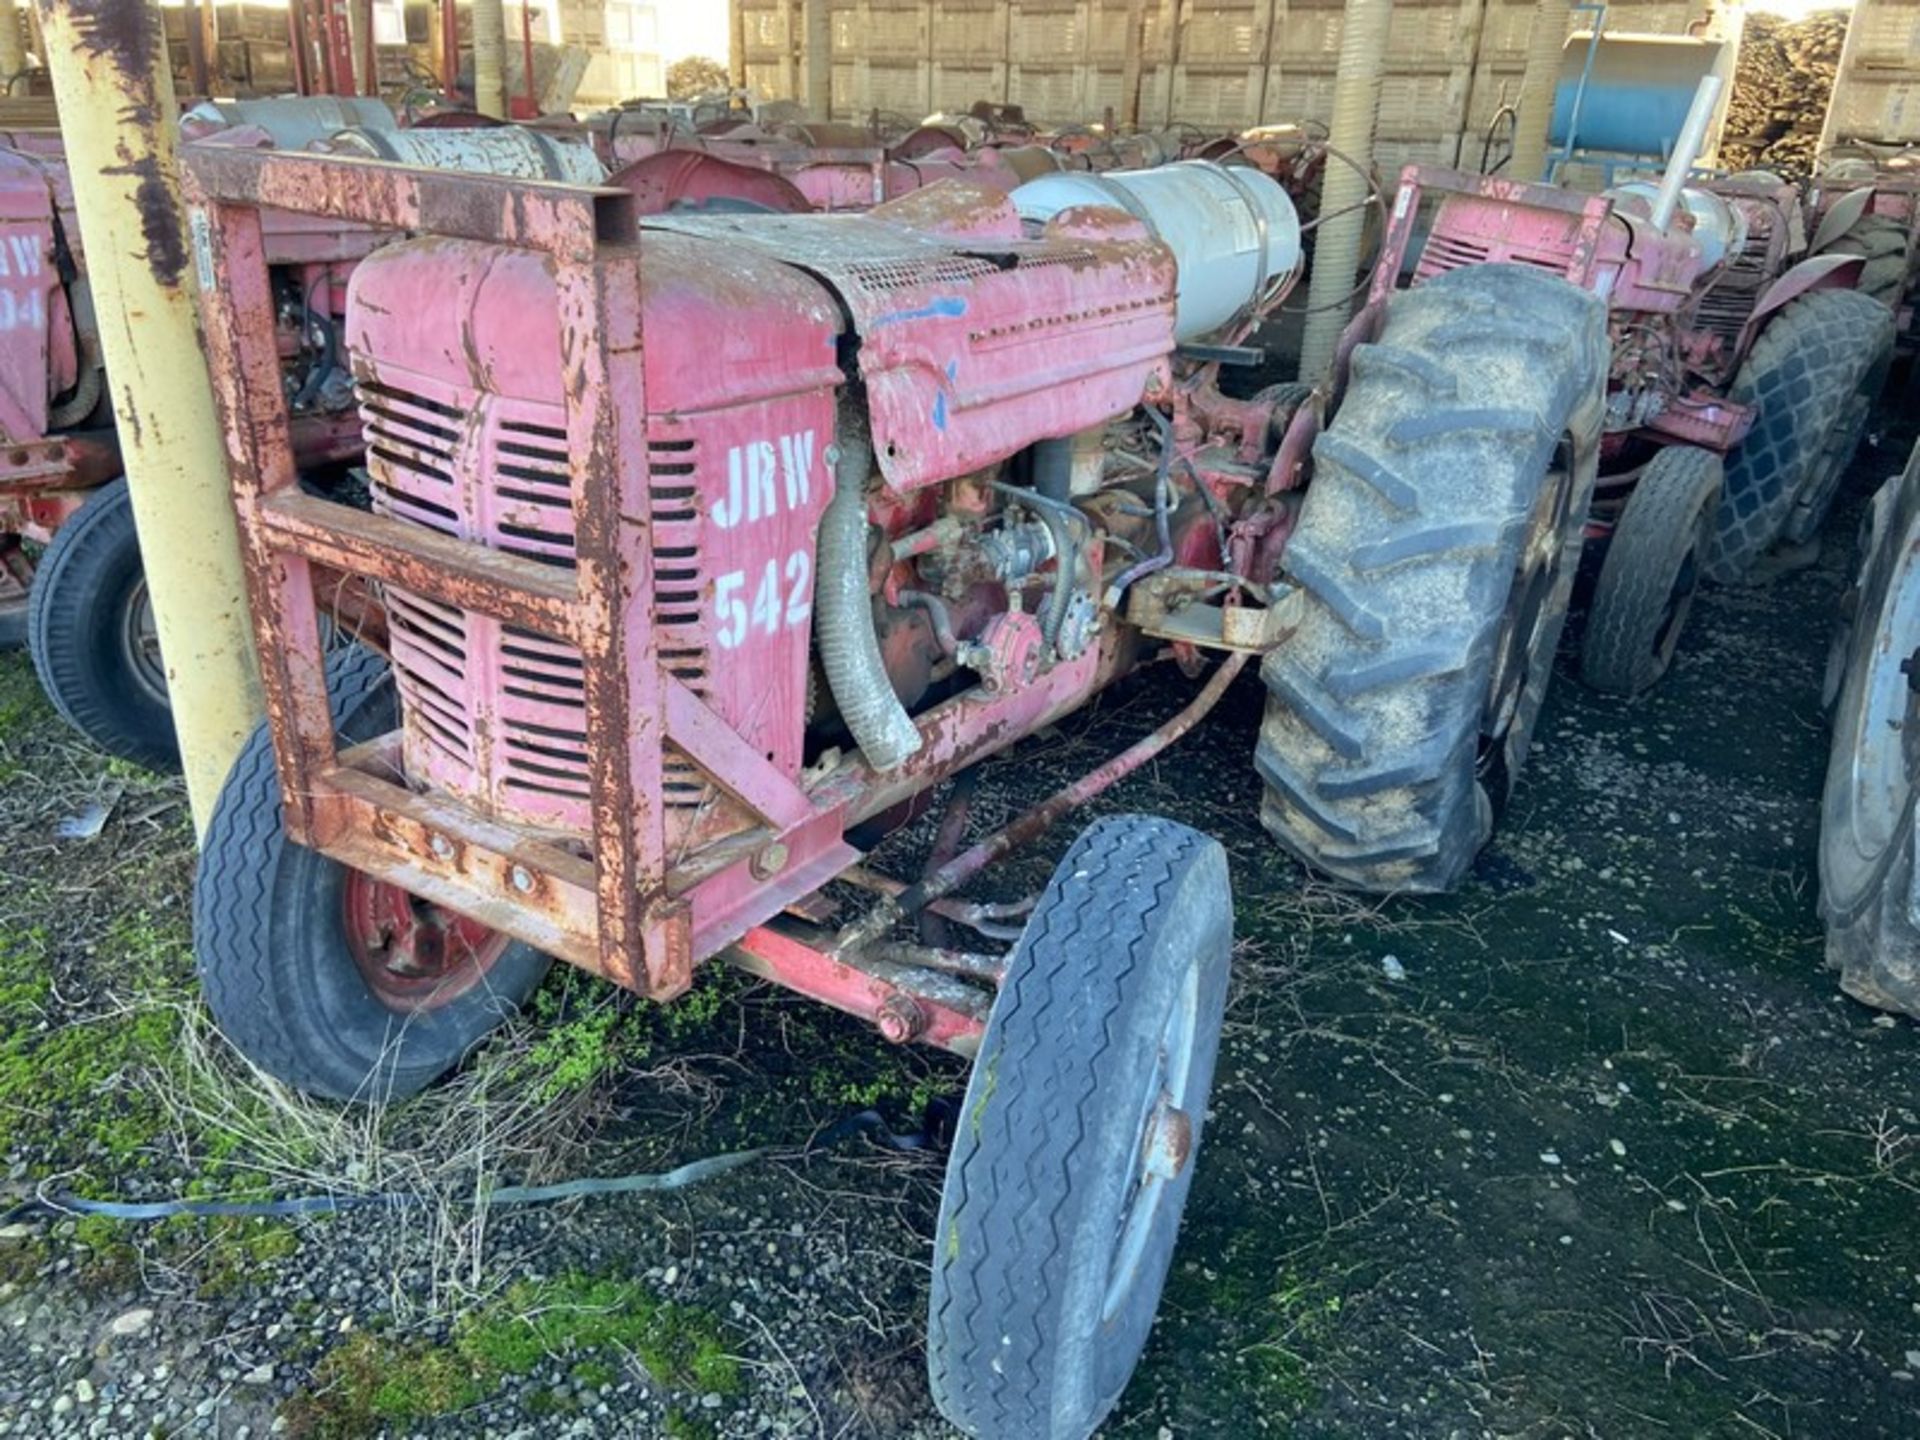 JRW Tractor (Unit 542)(LOCATED IN ATWATER, CA) - Image 2 of 3